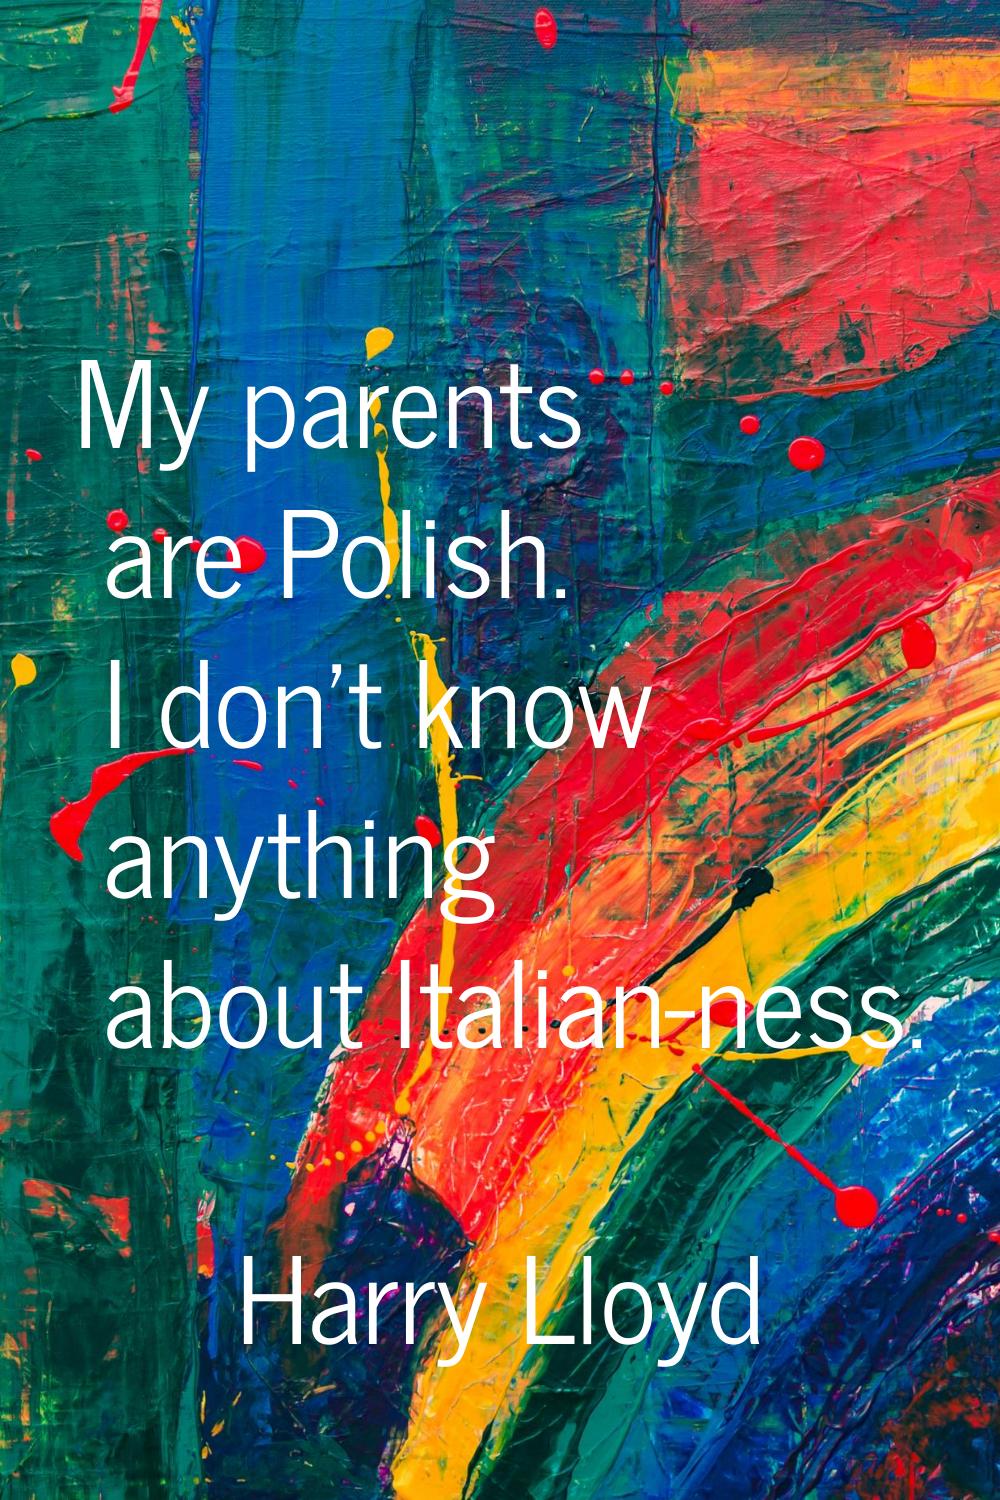 My parents are Polish. I don't know anything about Italian-ness.